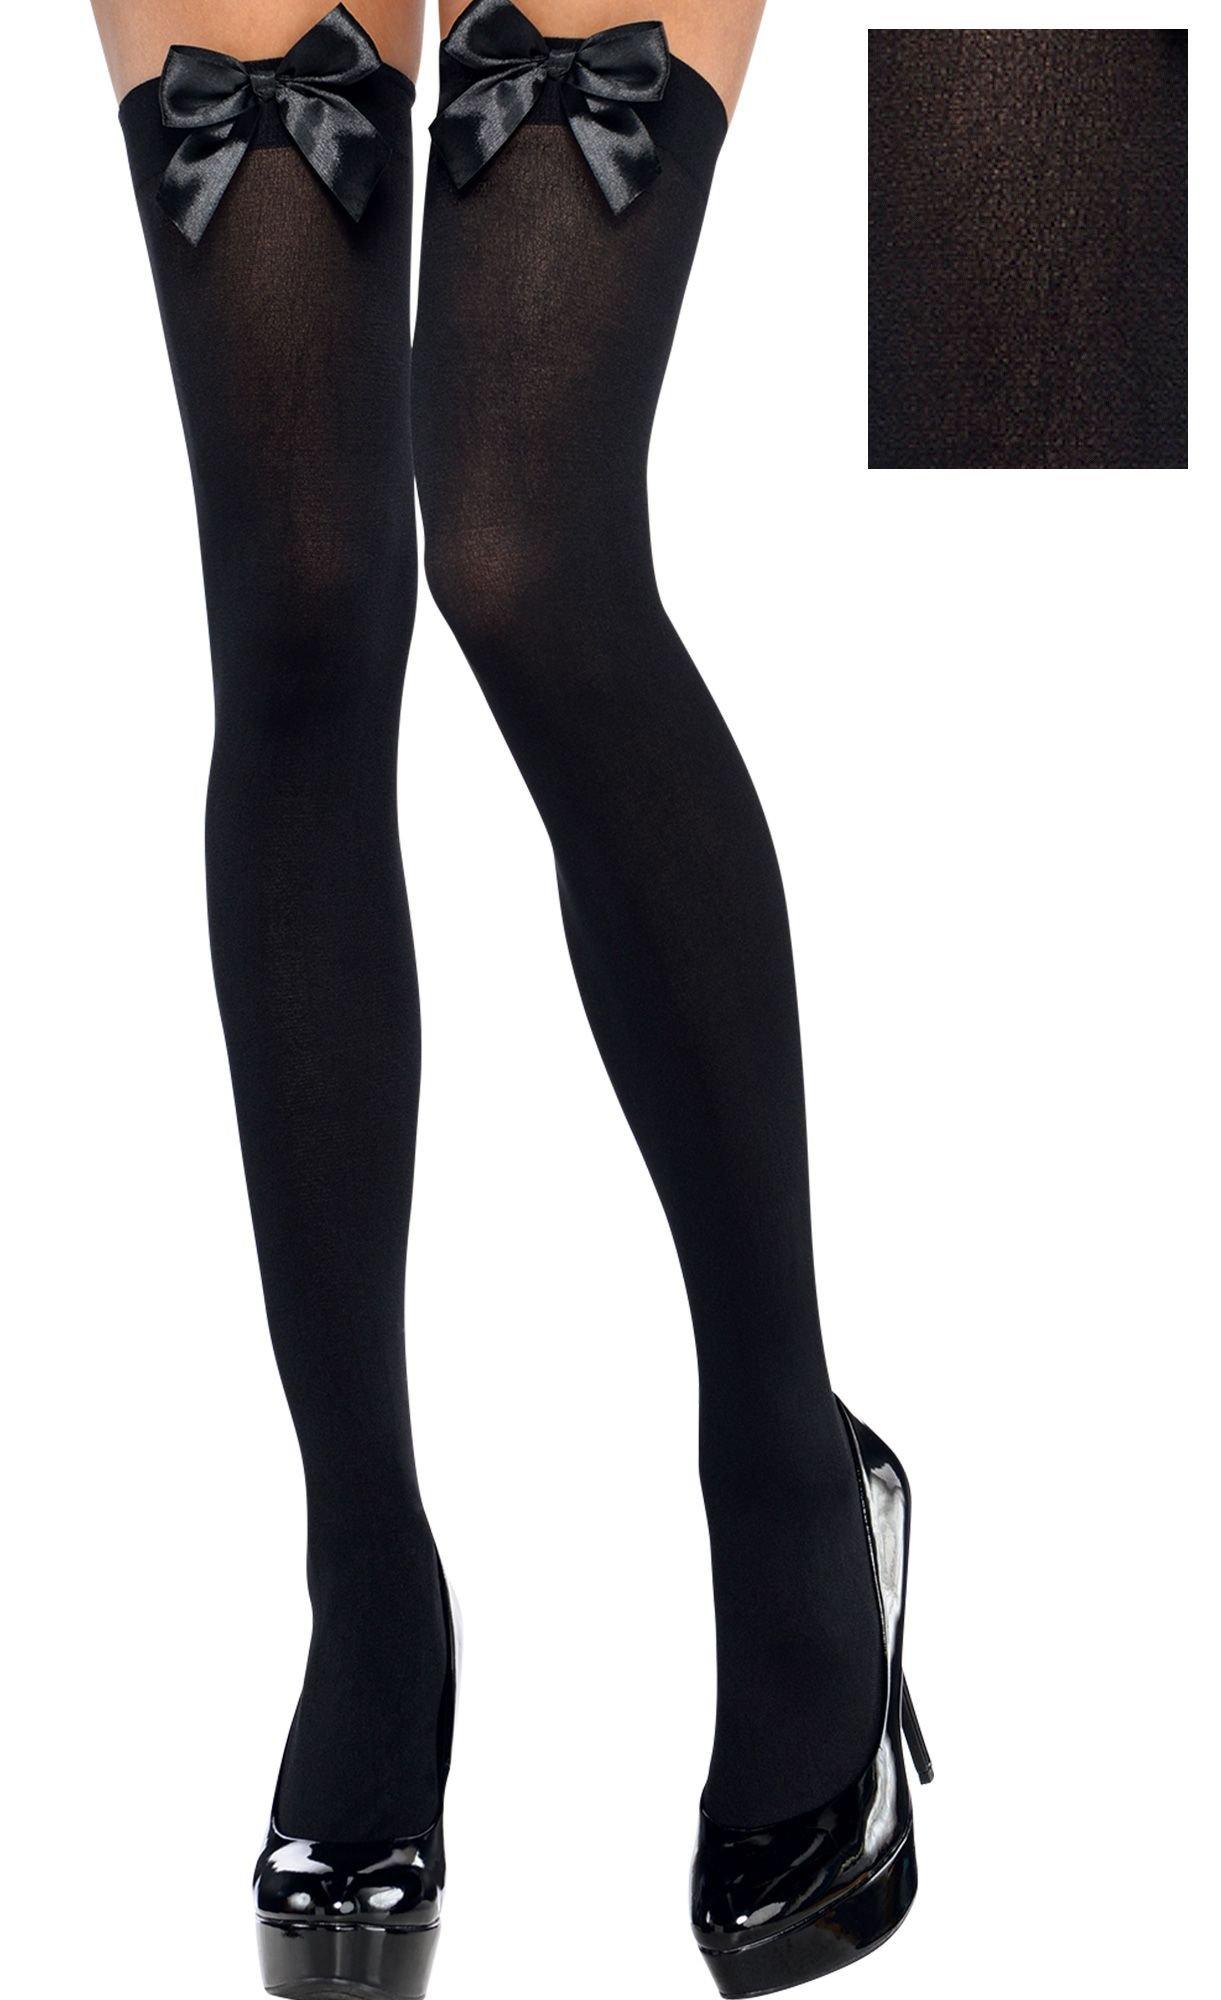 Adult Black Bows Opaque Thigh-High Stockings